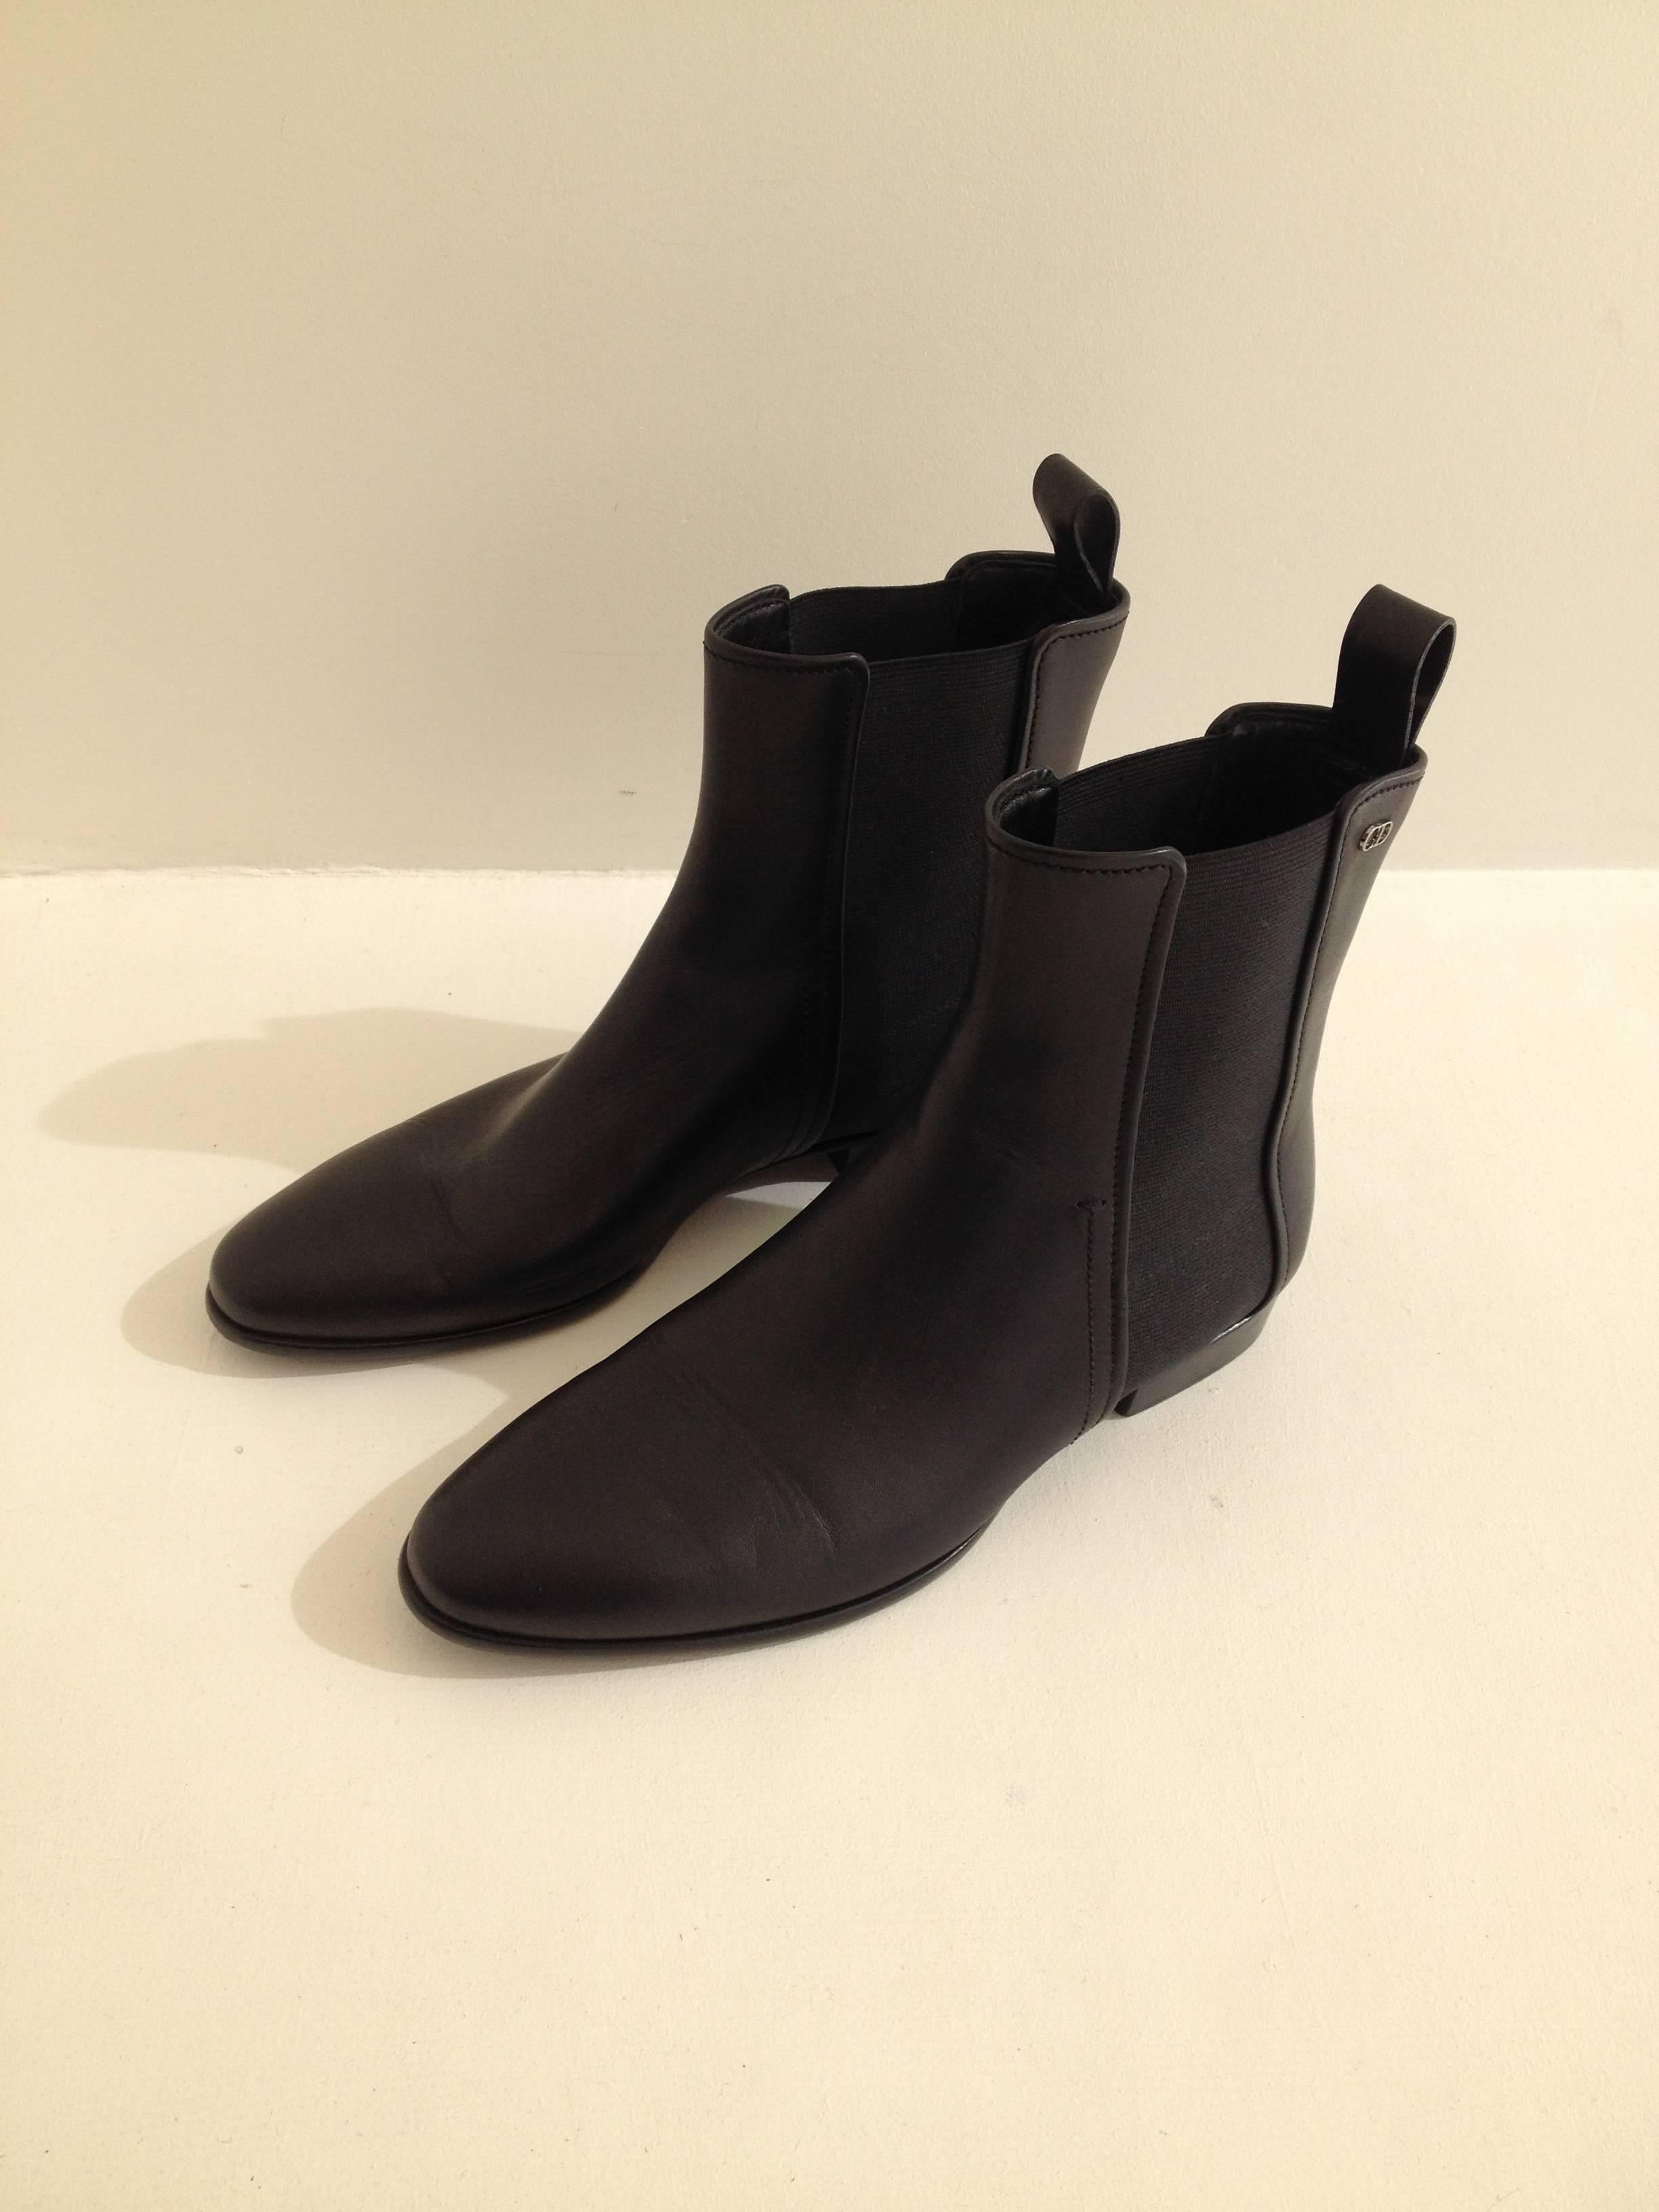 Christian Dior Black Leather Ankle Boot Size 37 (6.5) In New Condition For Sale In San Francisco, CA